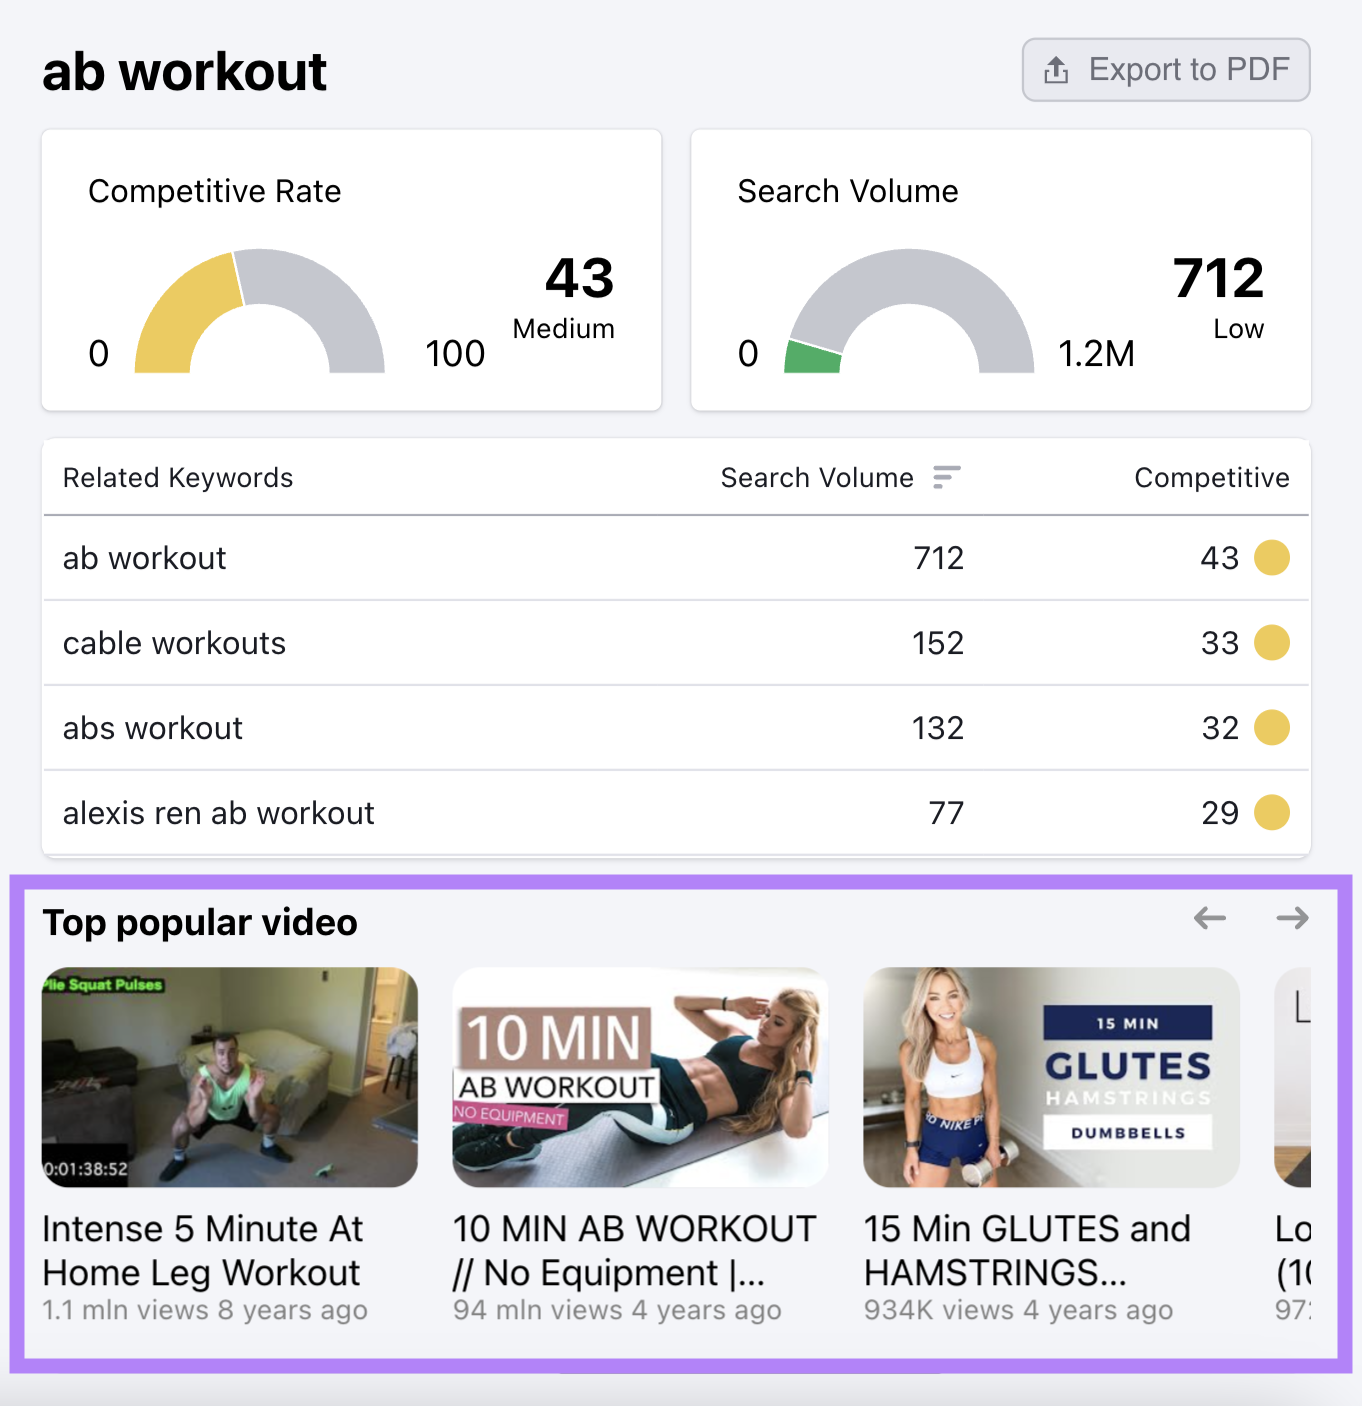 "Top popular video" section shown for "ab workout" keyword in Keyword Analytics for YouTube app